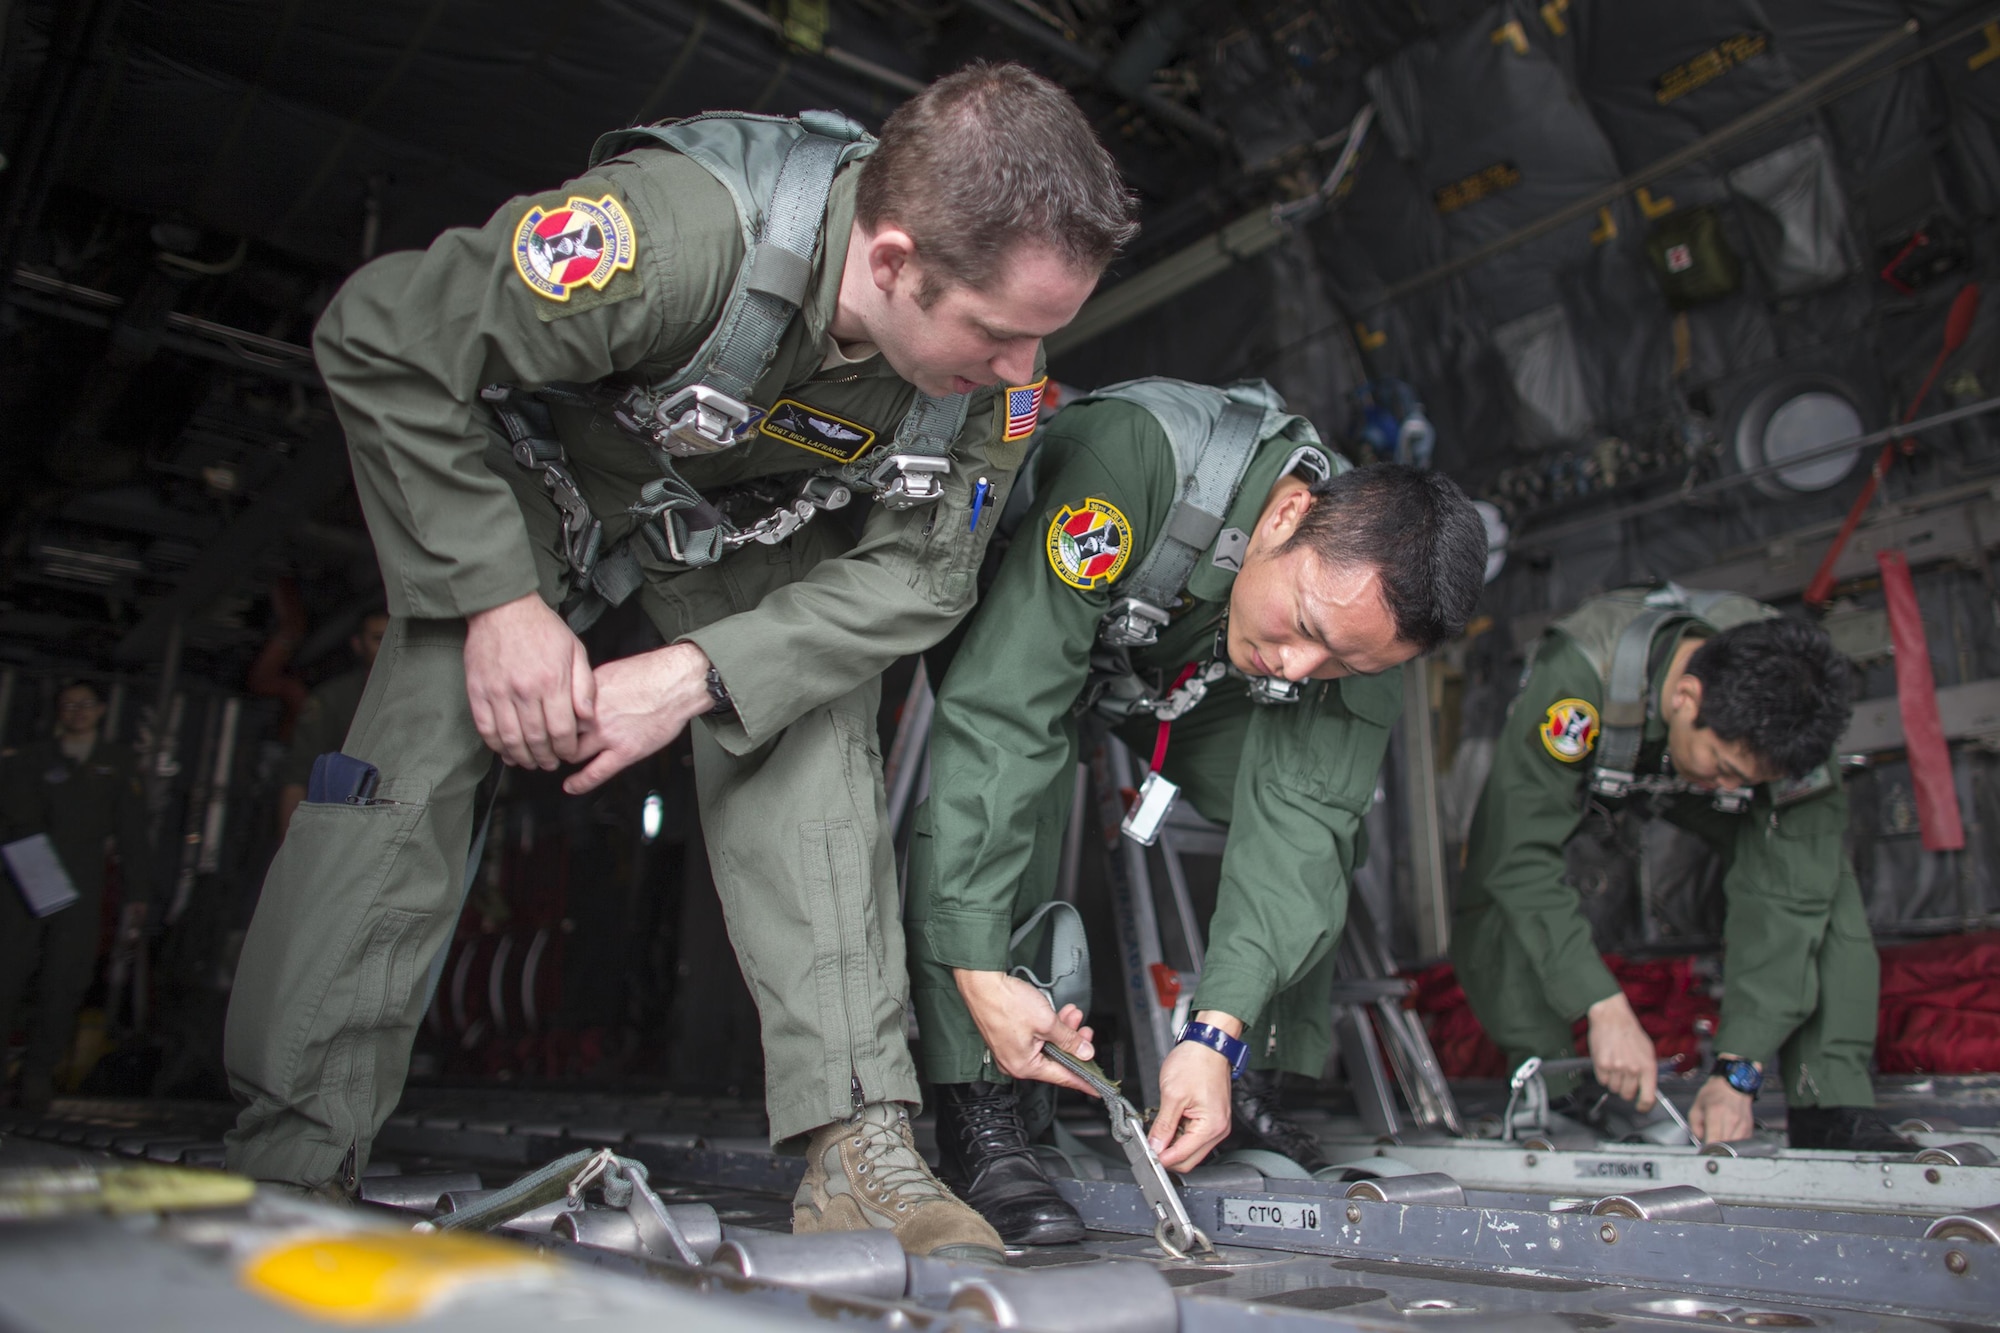 (Left to right) U.S. Air Force Master Sgt. Richard LaFrance, 36th Airlift Squadron C-130 loadmaster, instructs Japan Air Self-Defense Force Staff Sgt. Naoto Ishii, 403rd Tactical Airlift Squadron C-1 loadmaster, and JASDF Tech. Sgt. Suguru Yahata, Special Airlift Group B747 loadmaster, on how to secure a harness at Yokota Air Base, Japan, March 23, 2016, during non-commission officer exchange program. Yokota hosted sixteen JASDF NCO members in various work-places for nine days. (U.S. Air Force photo by Osakabe Yasuo/Released)